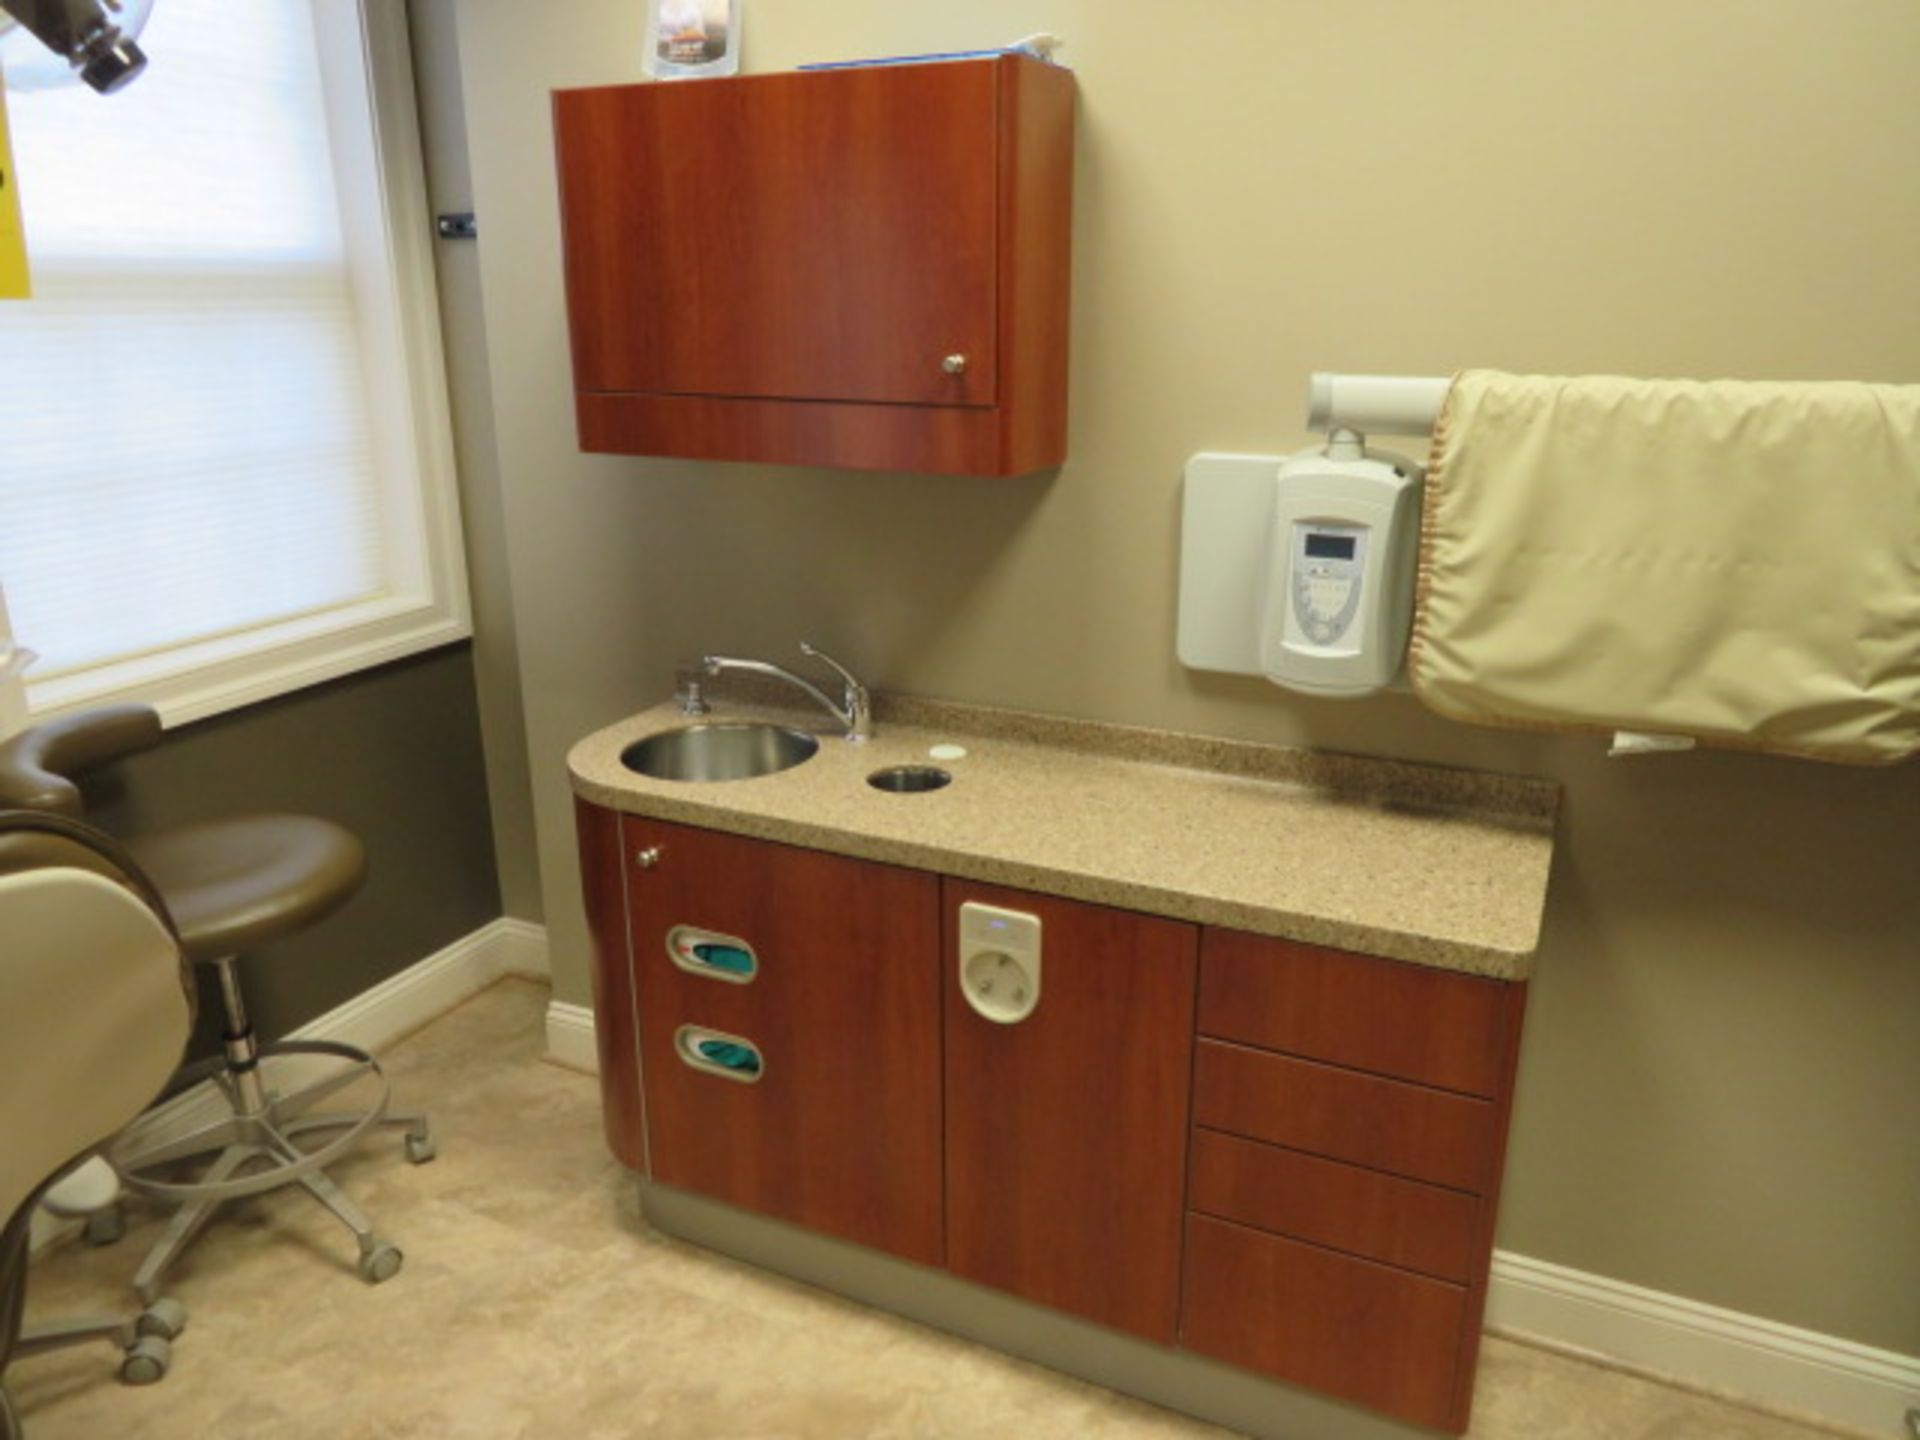 ADEC 511 SERIES DENTAL CHAIR, 541 DUO REAR-DELIVERY UNIT, 5580 CABINET, 5531/5730 SINK W/ CABINET - Image 4 of 8